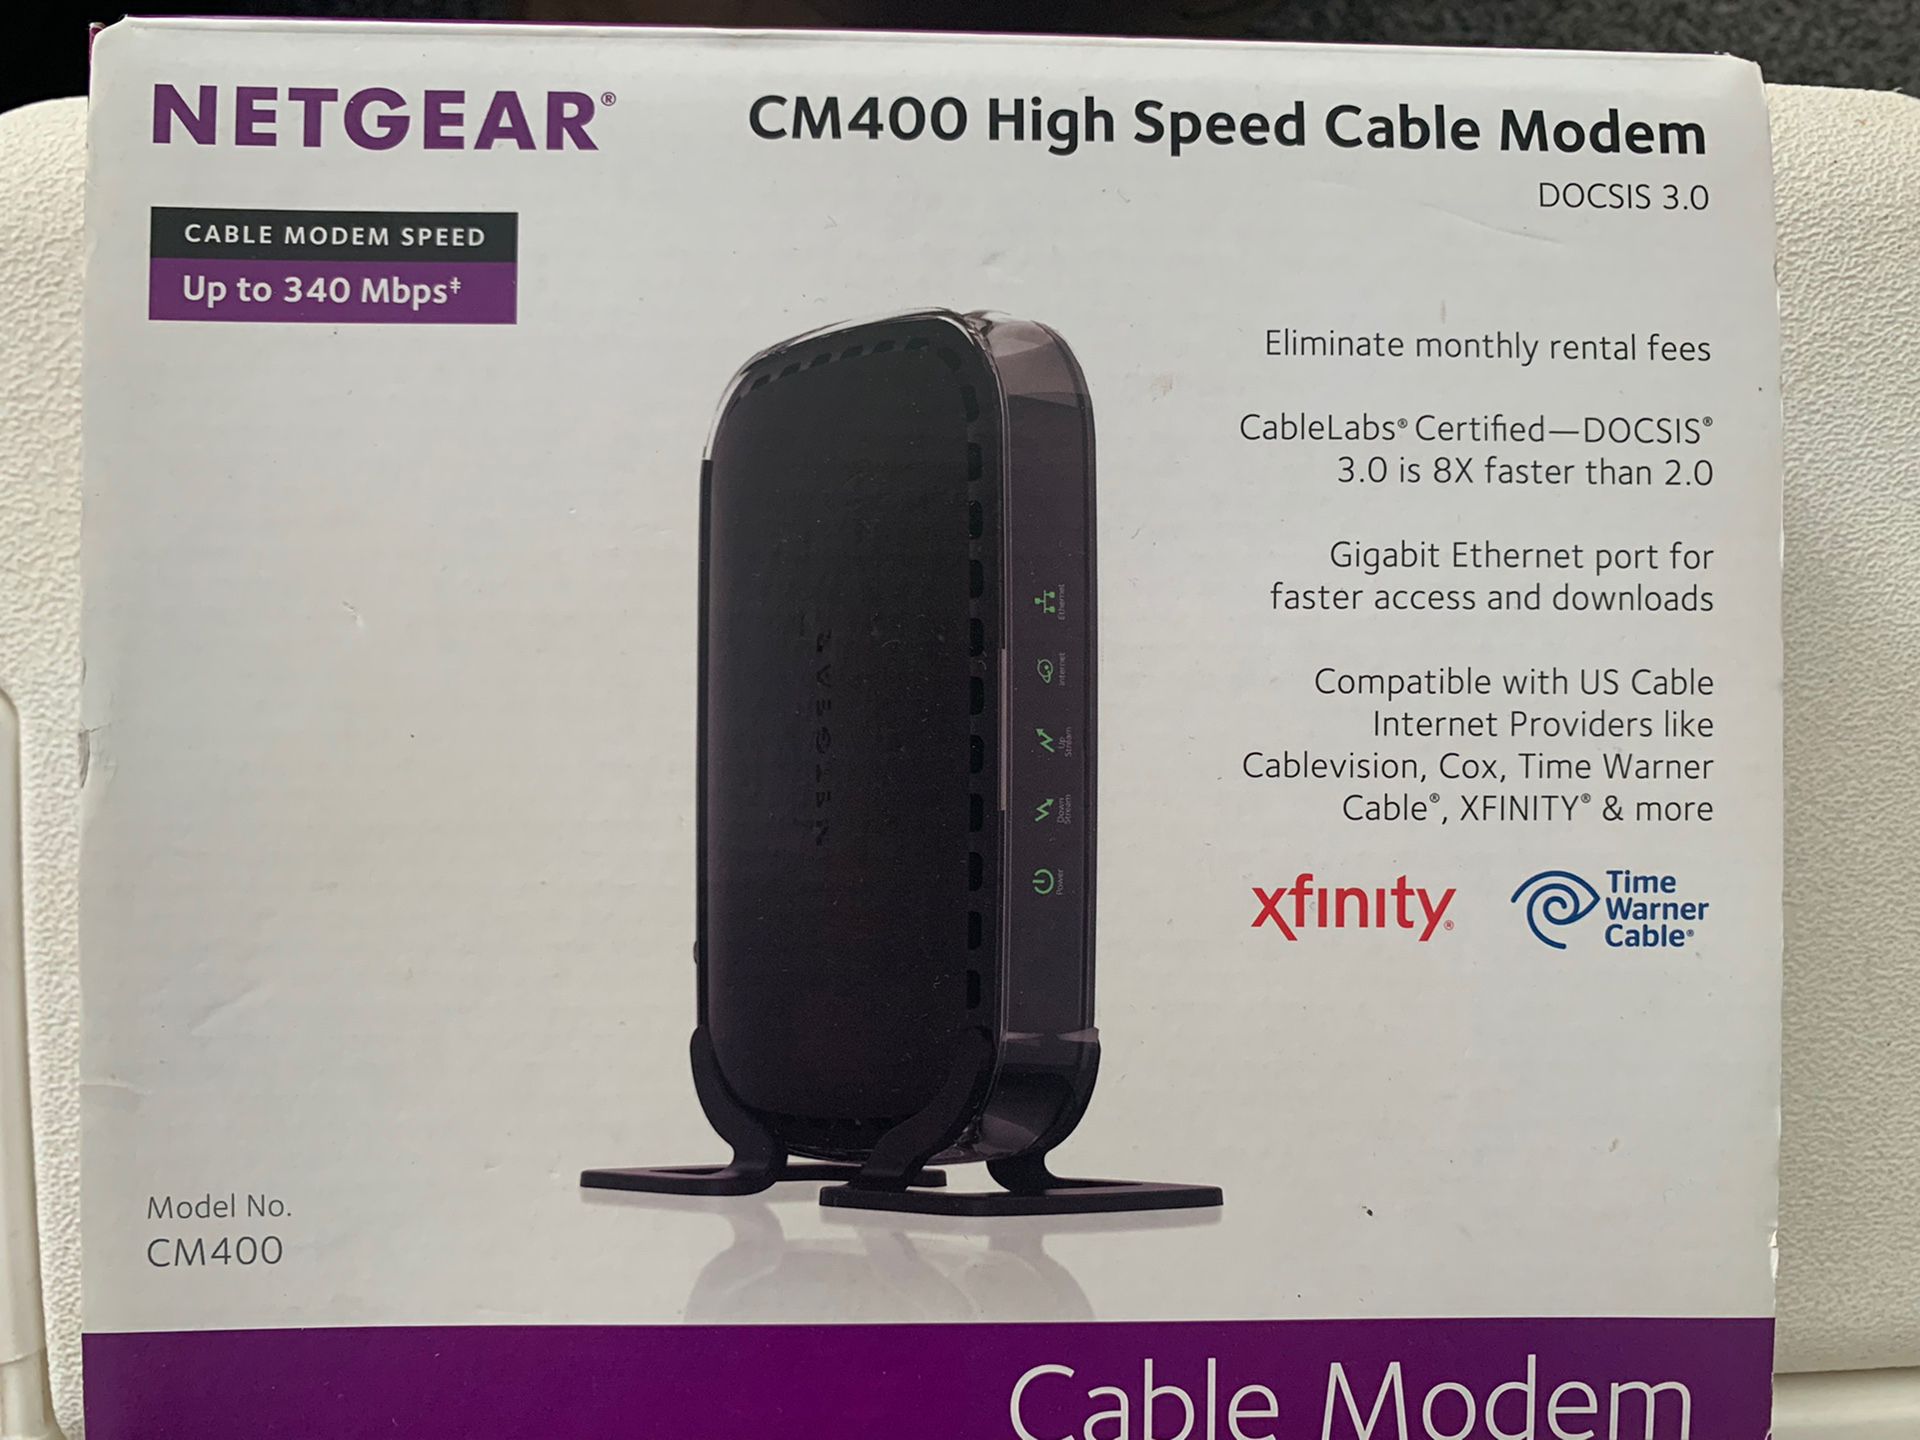 NETGEAR CM400 High Speed Cable Modem provides a connection to high-speed cable Internet, up to 340 Mbps